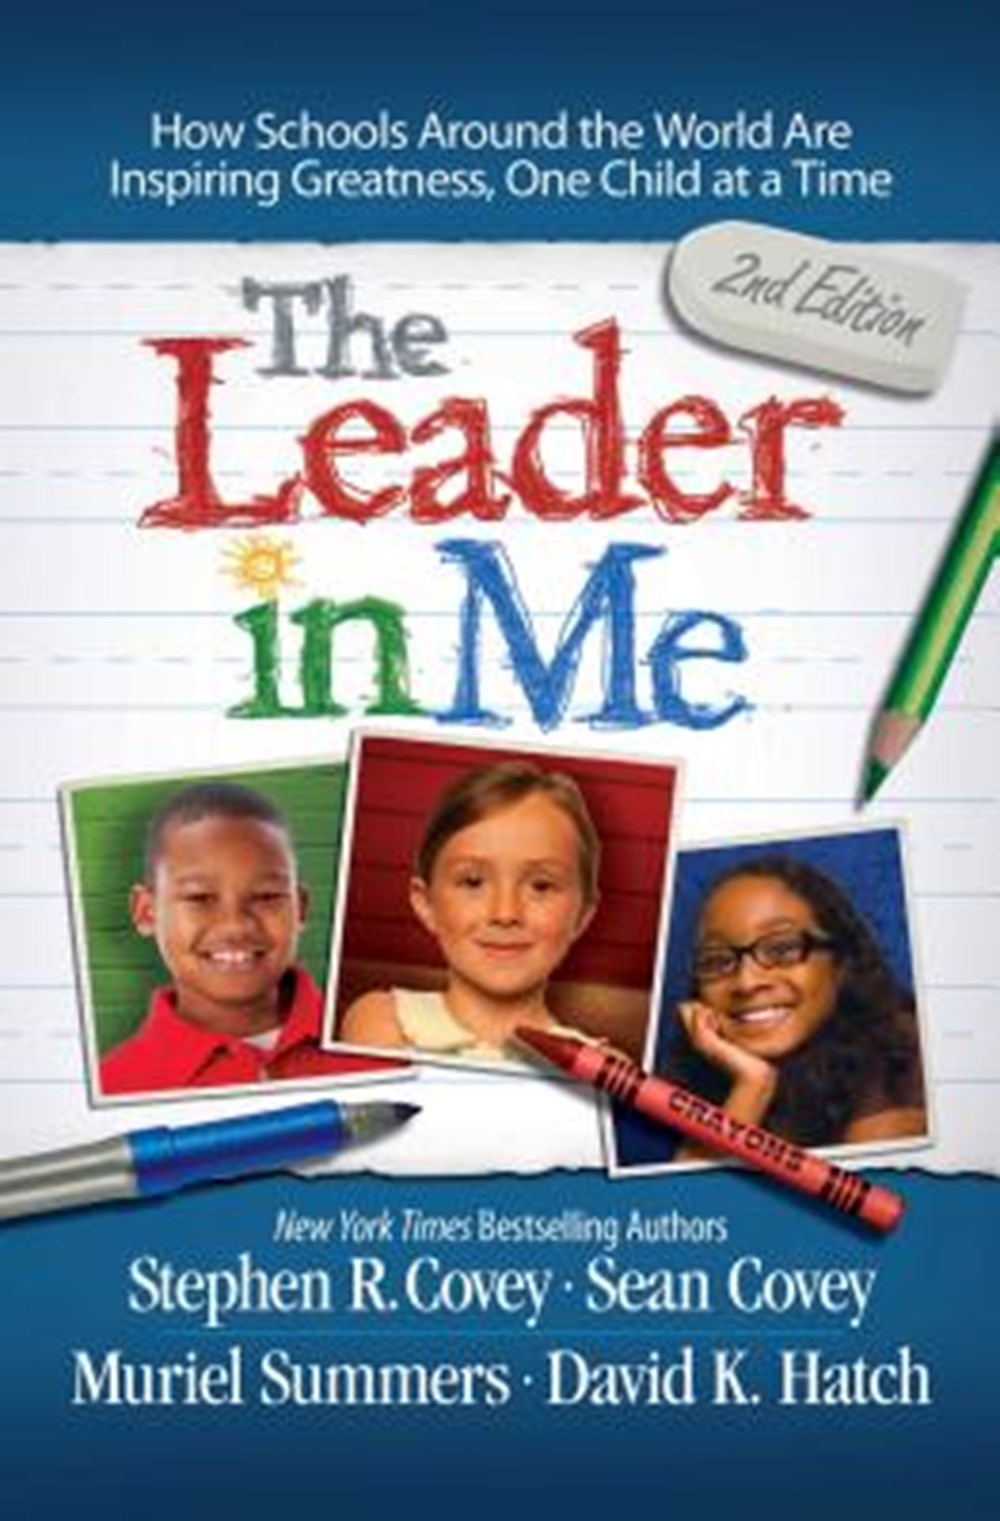 Leader in Me How Schools Around the World Are Inspiring Greatness, One Child at a Time